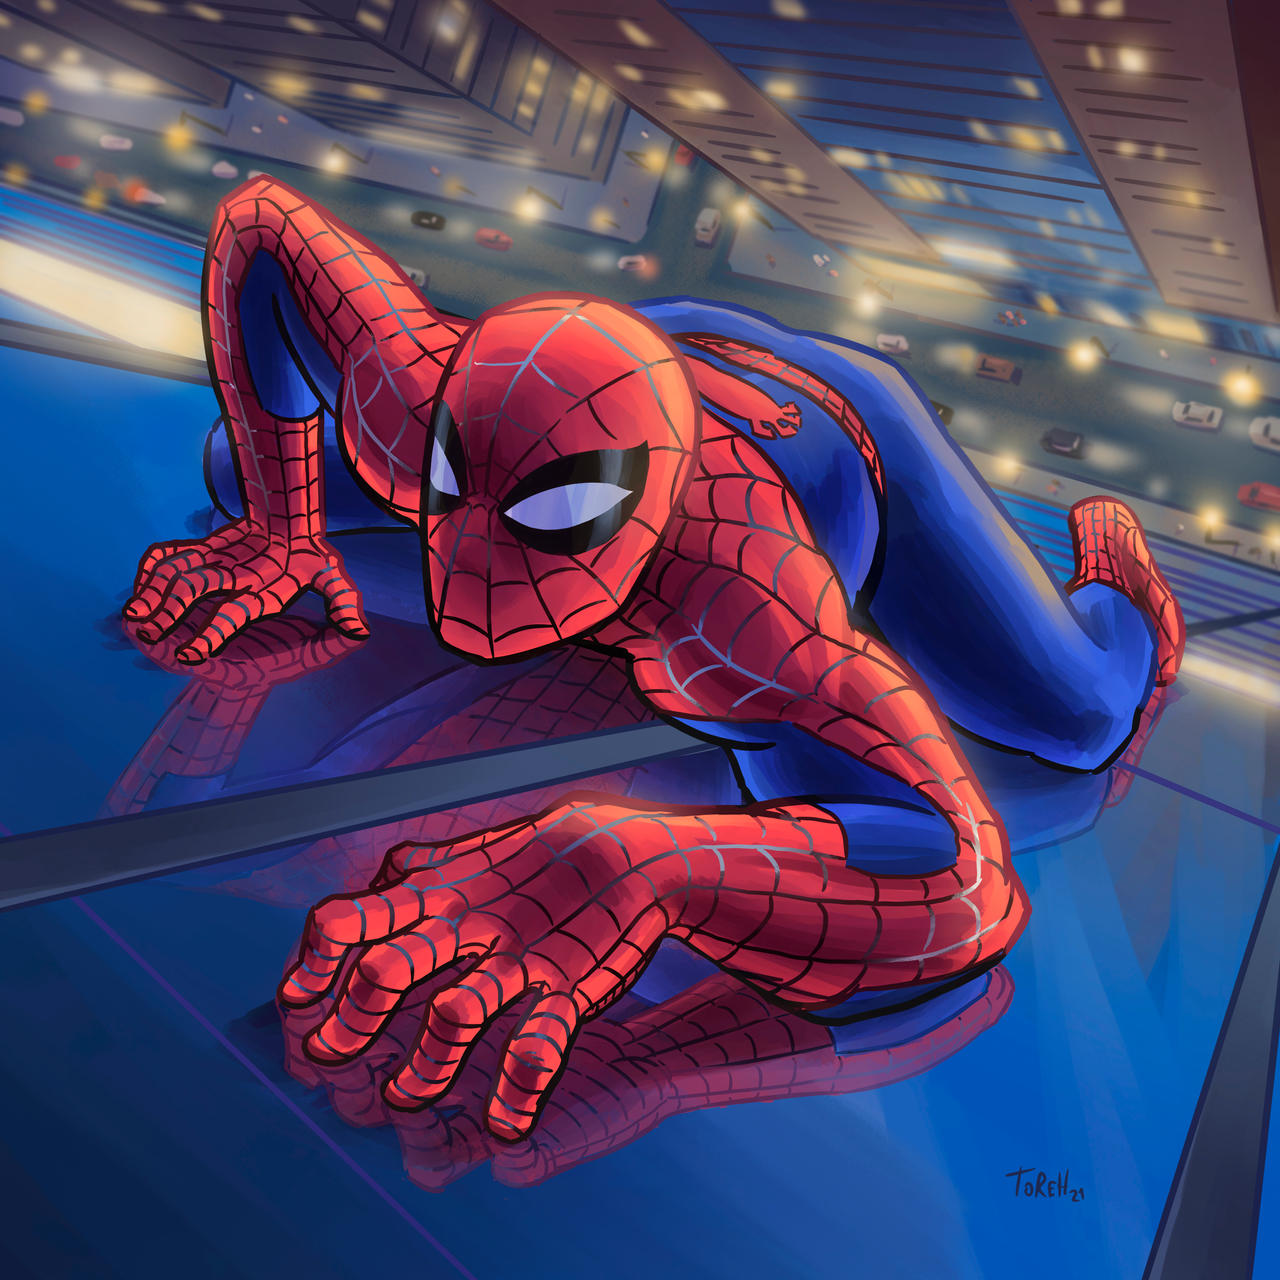 Spider-man the animated series by PatrickBrown on DeviantArt